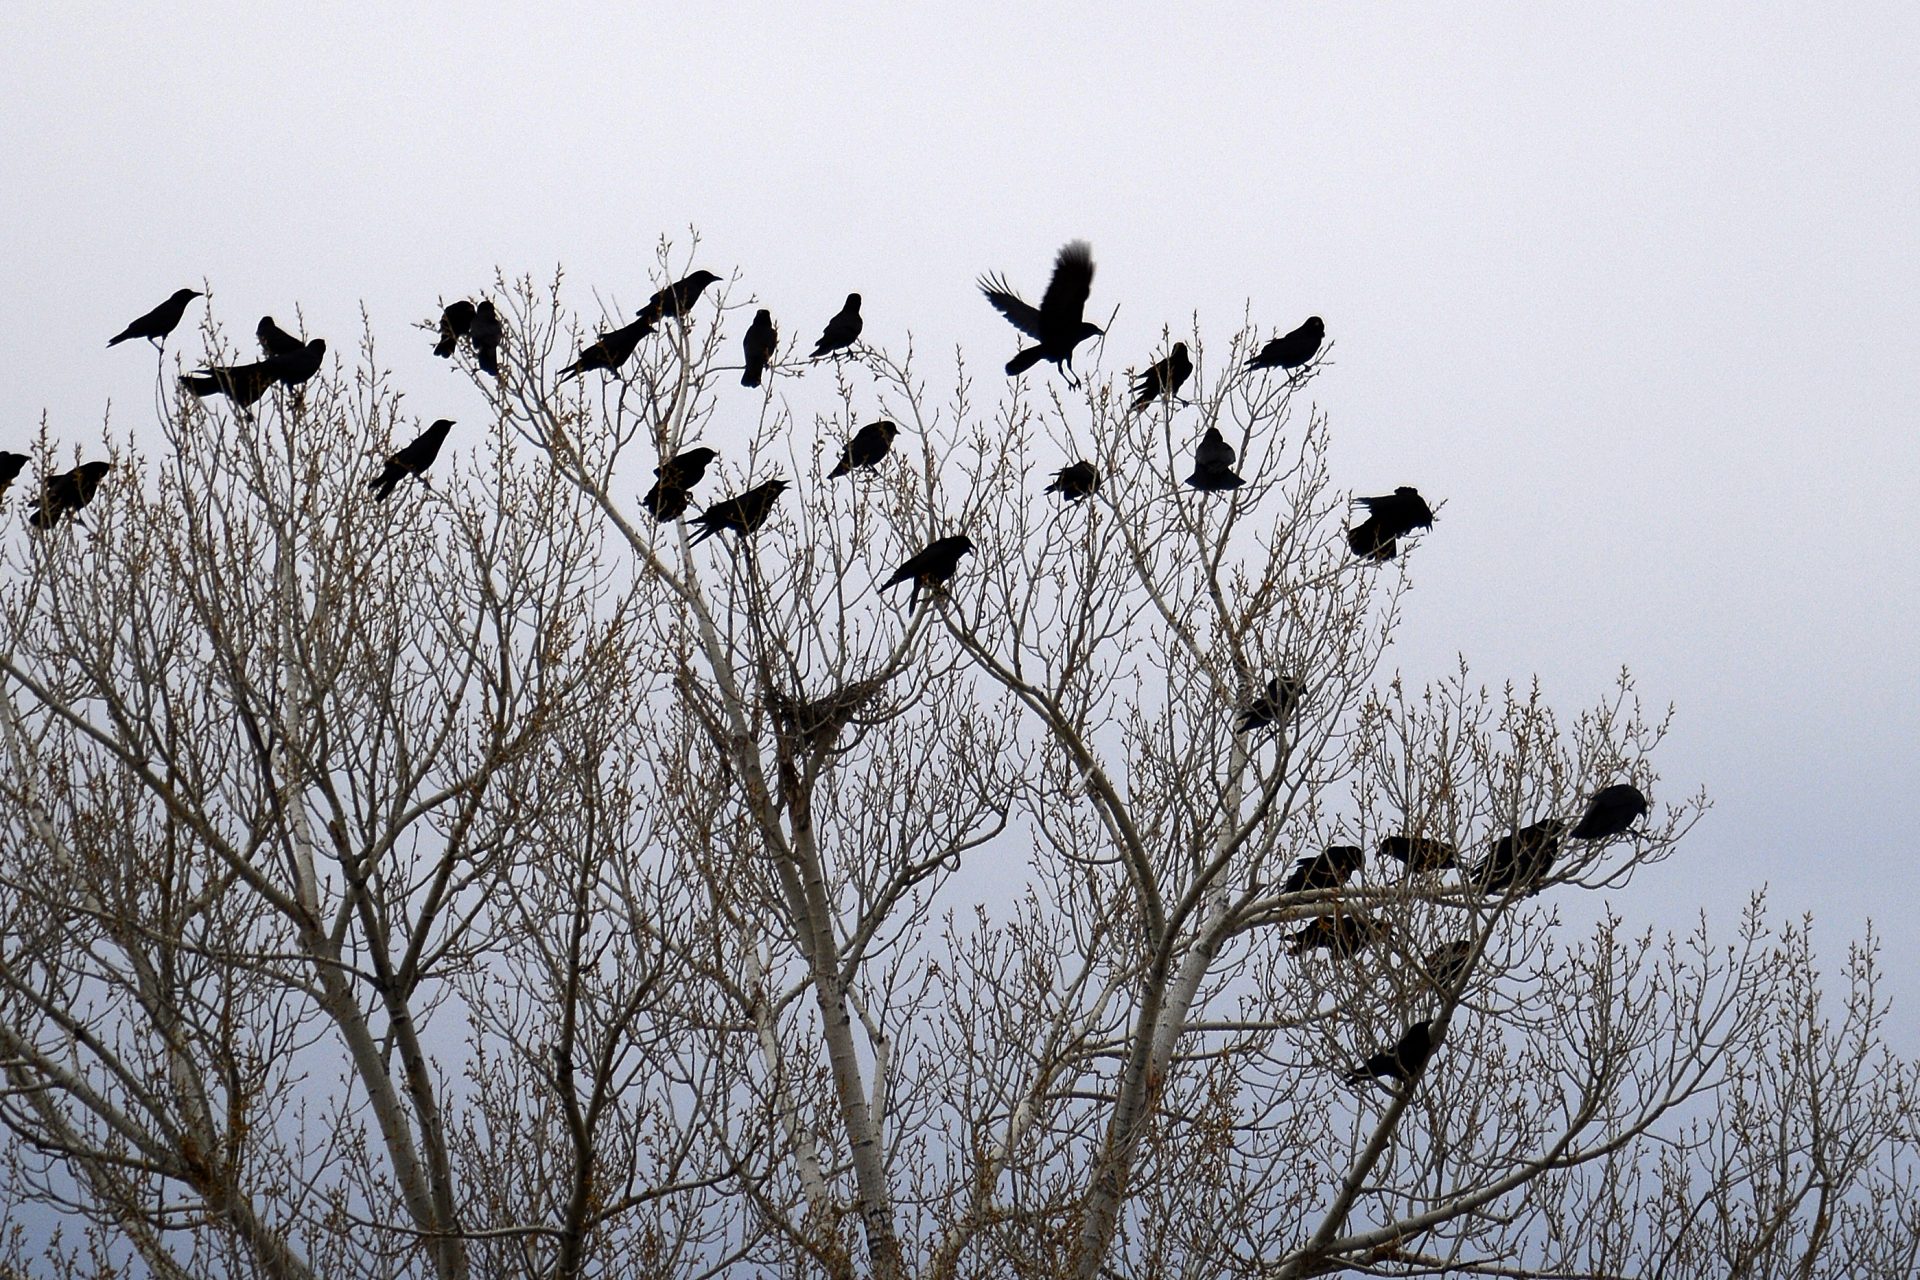 The attack of the jackdaws